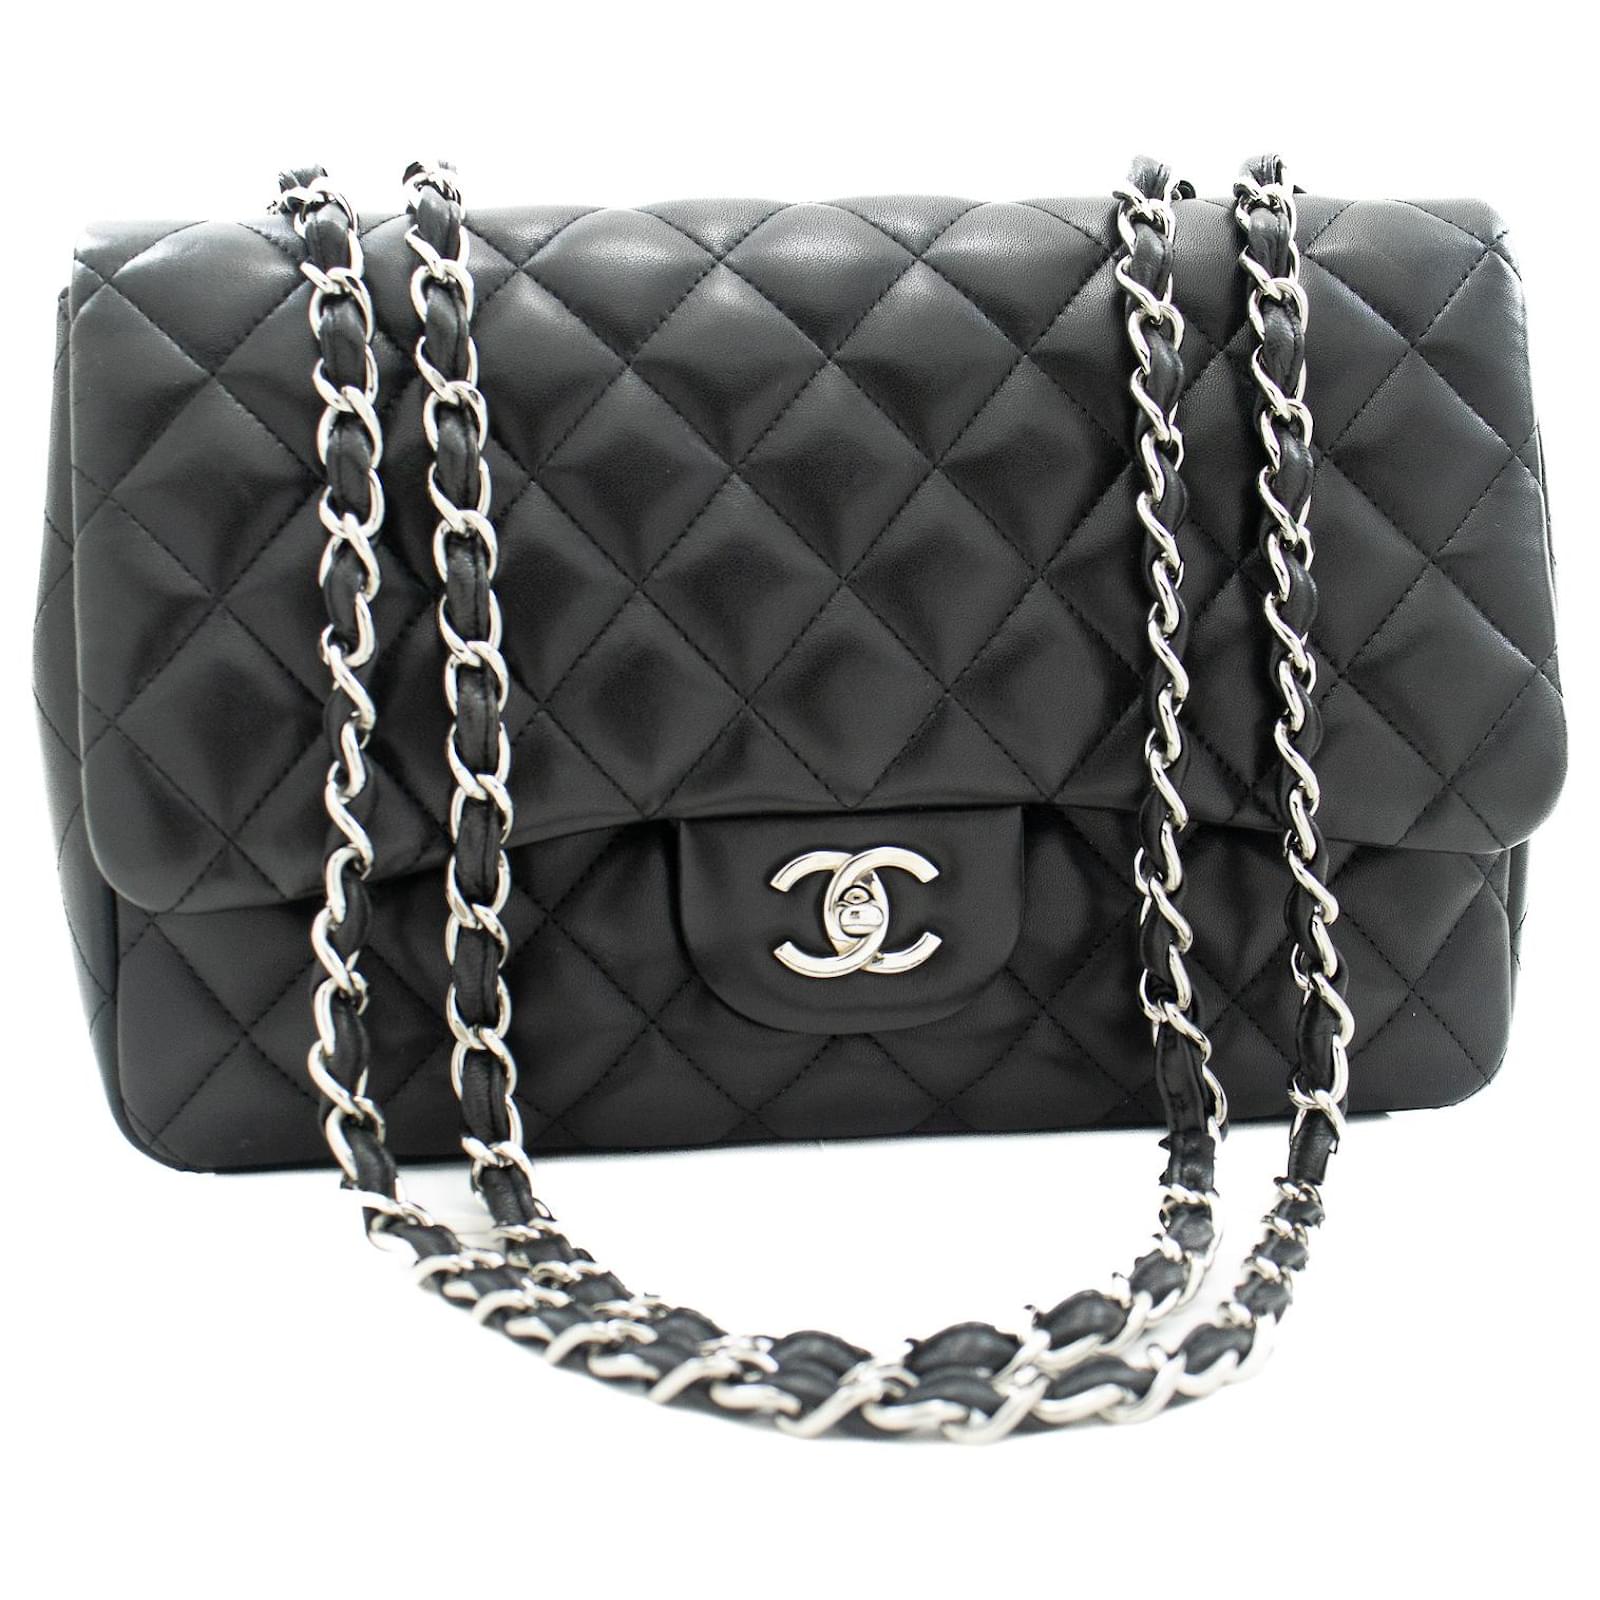 CHANEL Full Flap Chain Shoulder Bag Black Quilted Lambskin Purse L61 